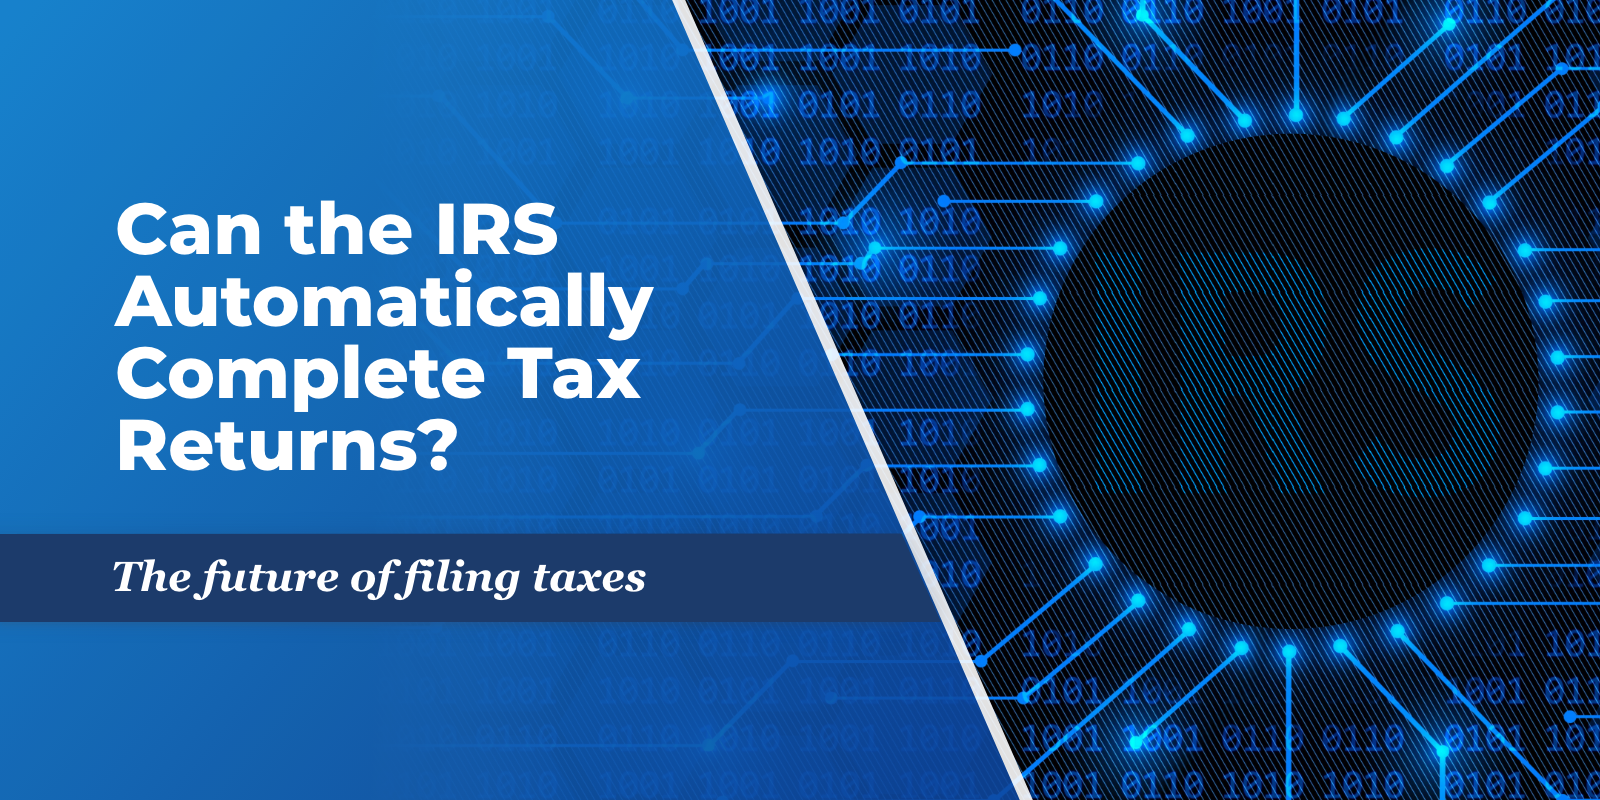 Can the IRS Automatically Complete Tax Returns?